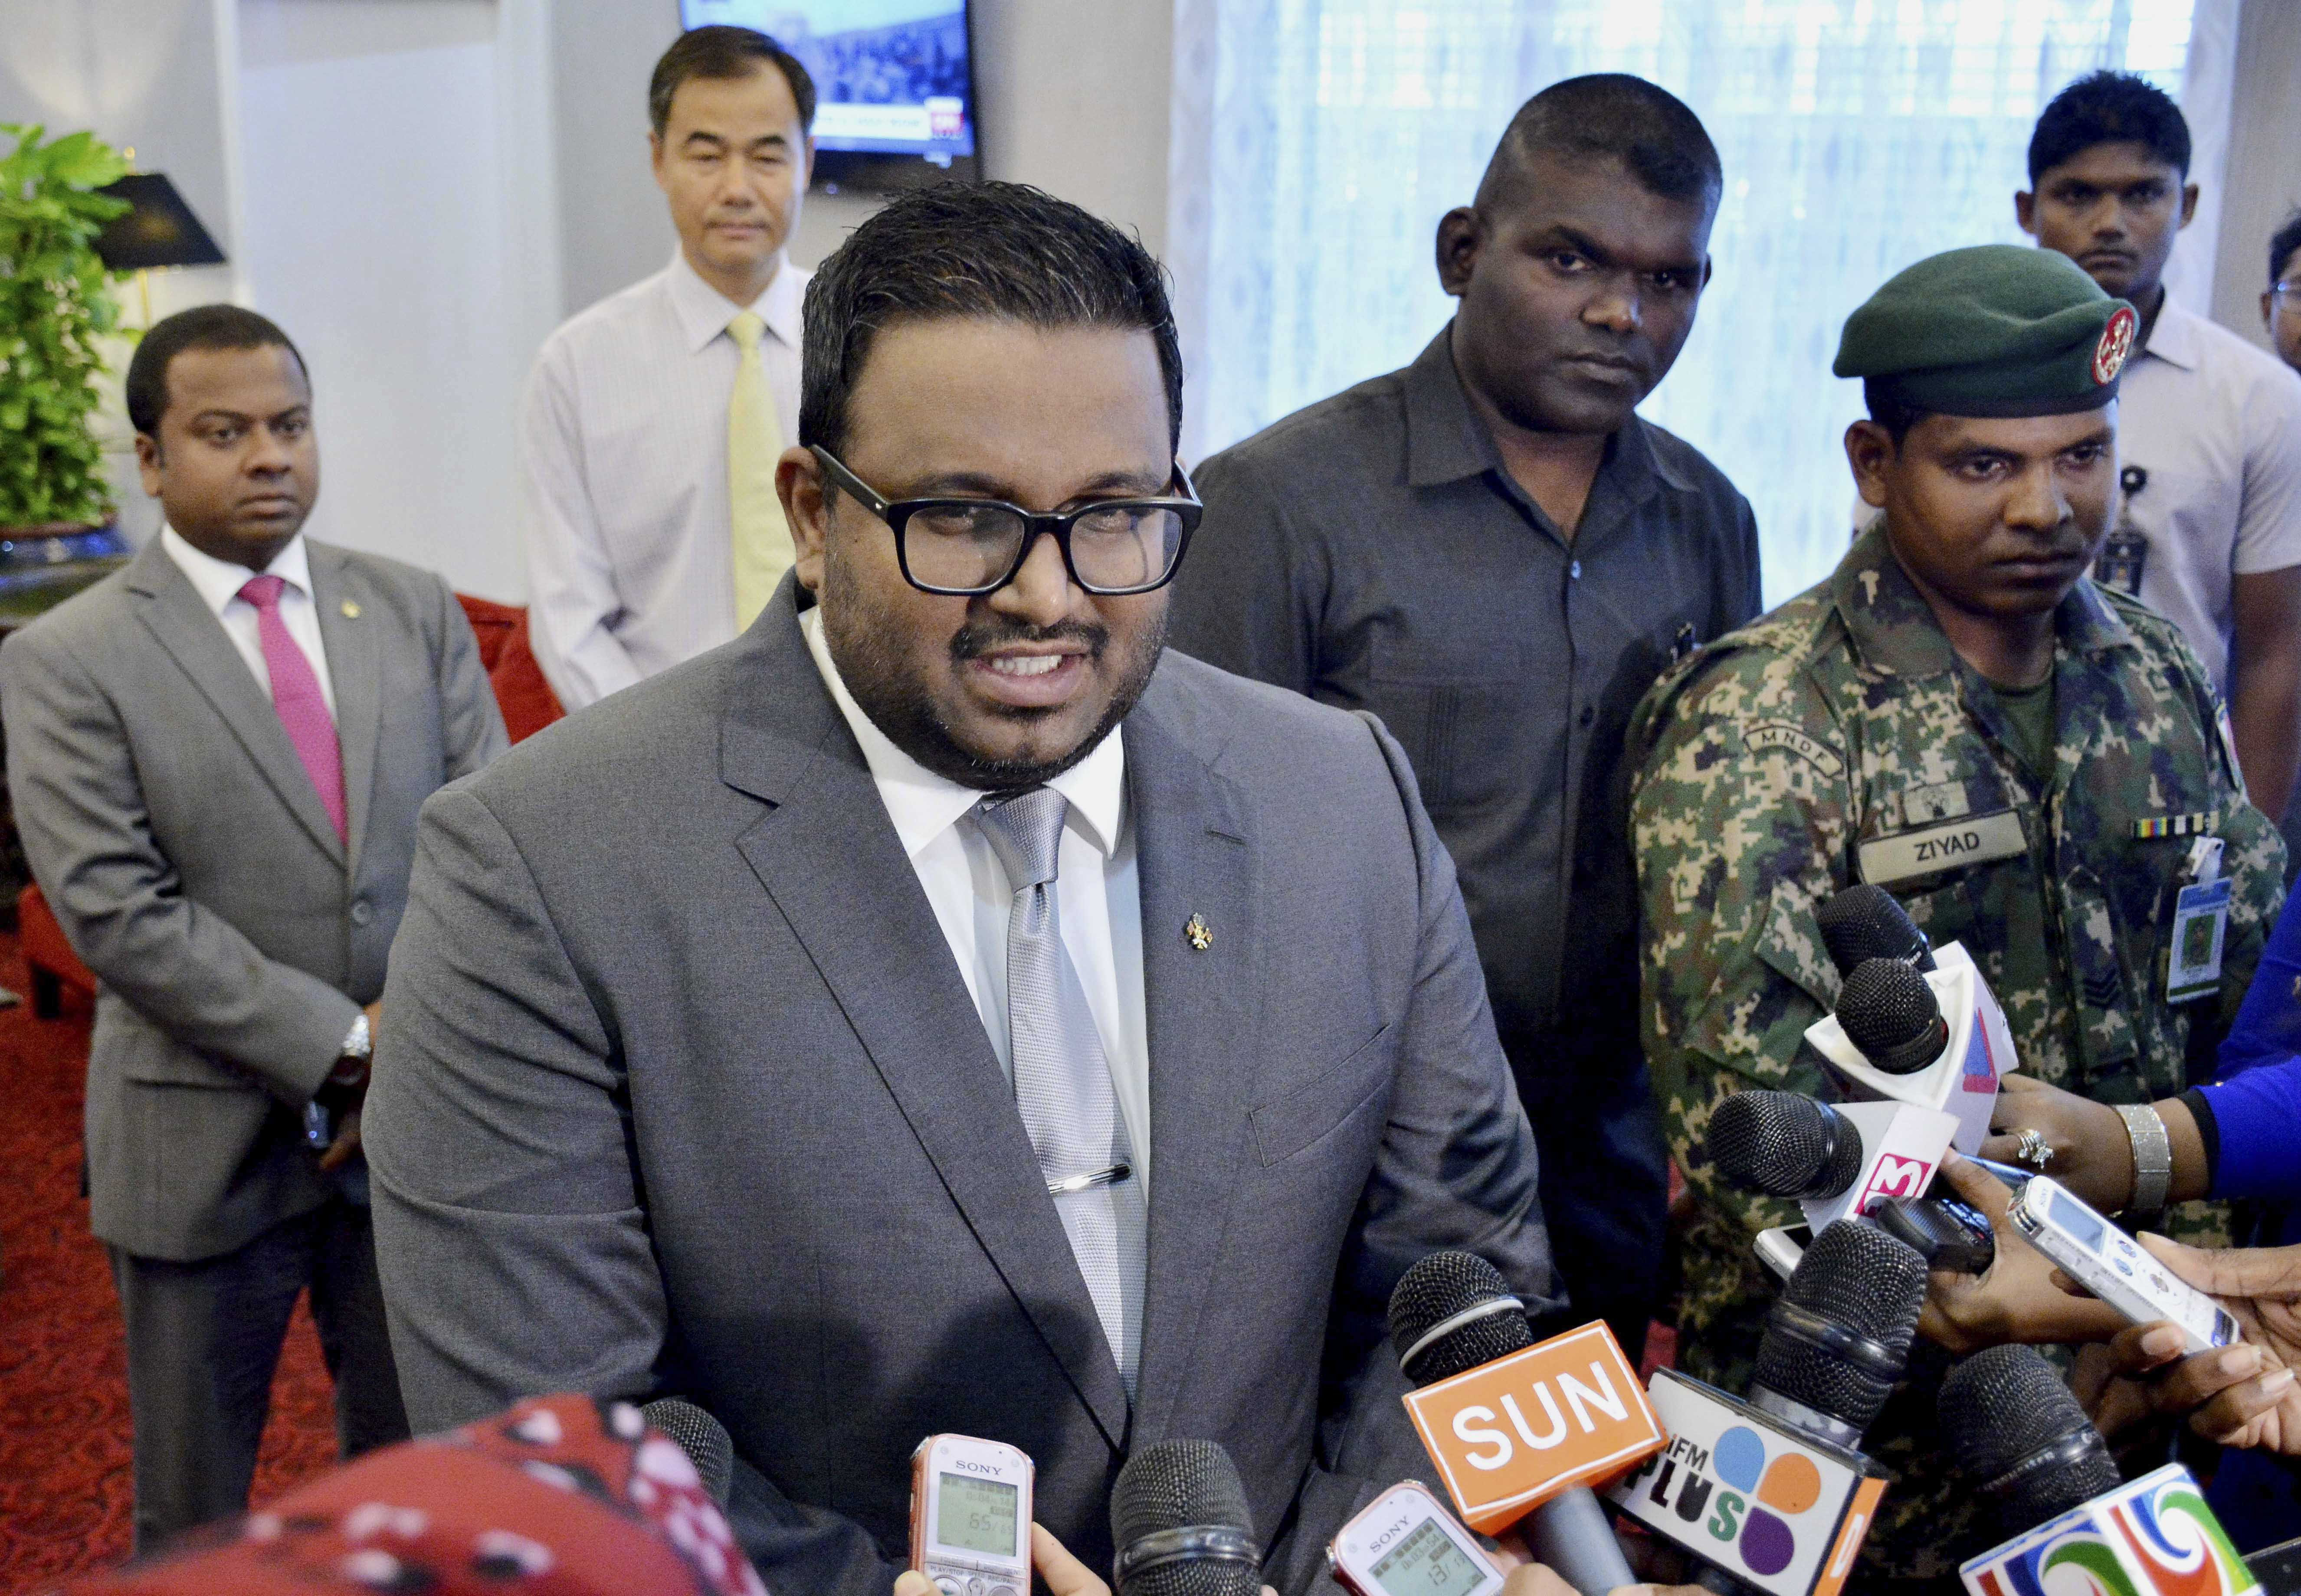 Maldives Vice President Ahmed Adeeb speaks to media earlier this month at the Ibrahim Nasir International Airport, near Male, Maldives. (Photo by Ali Naseer/AP)